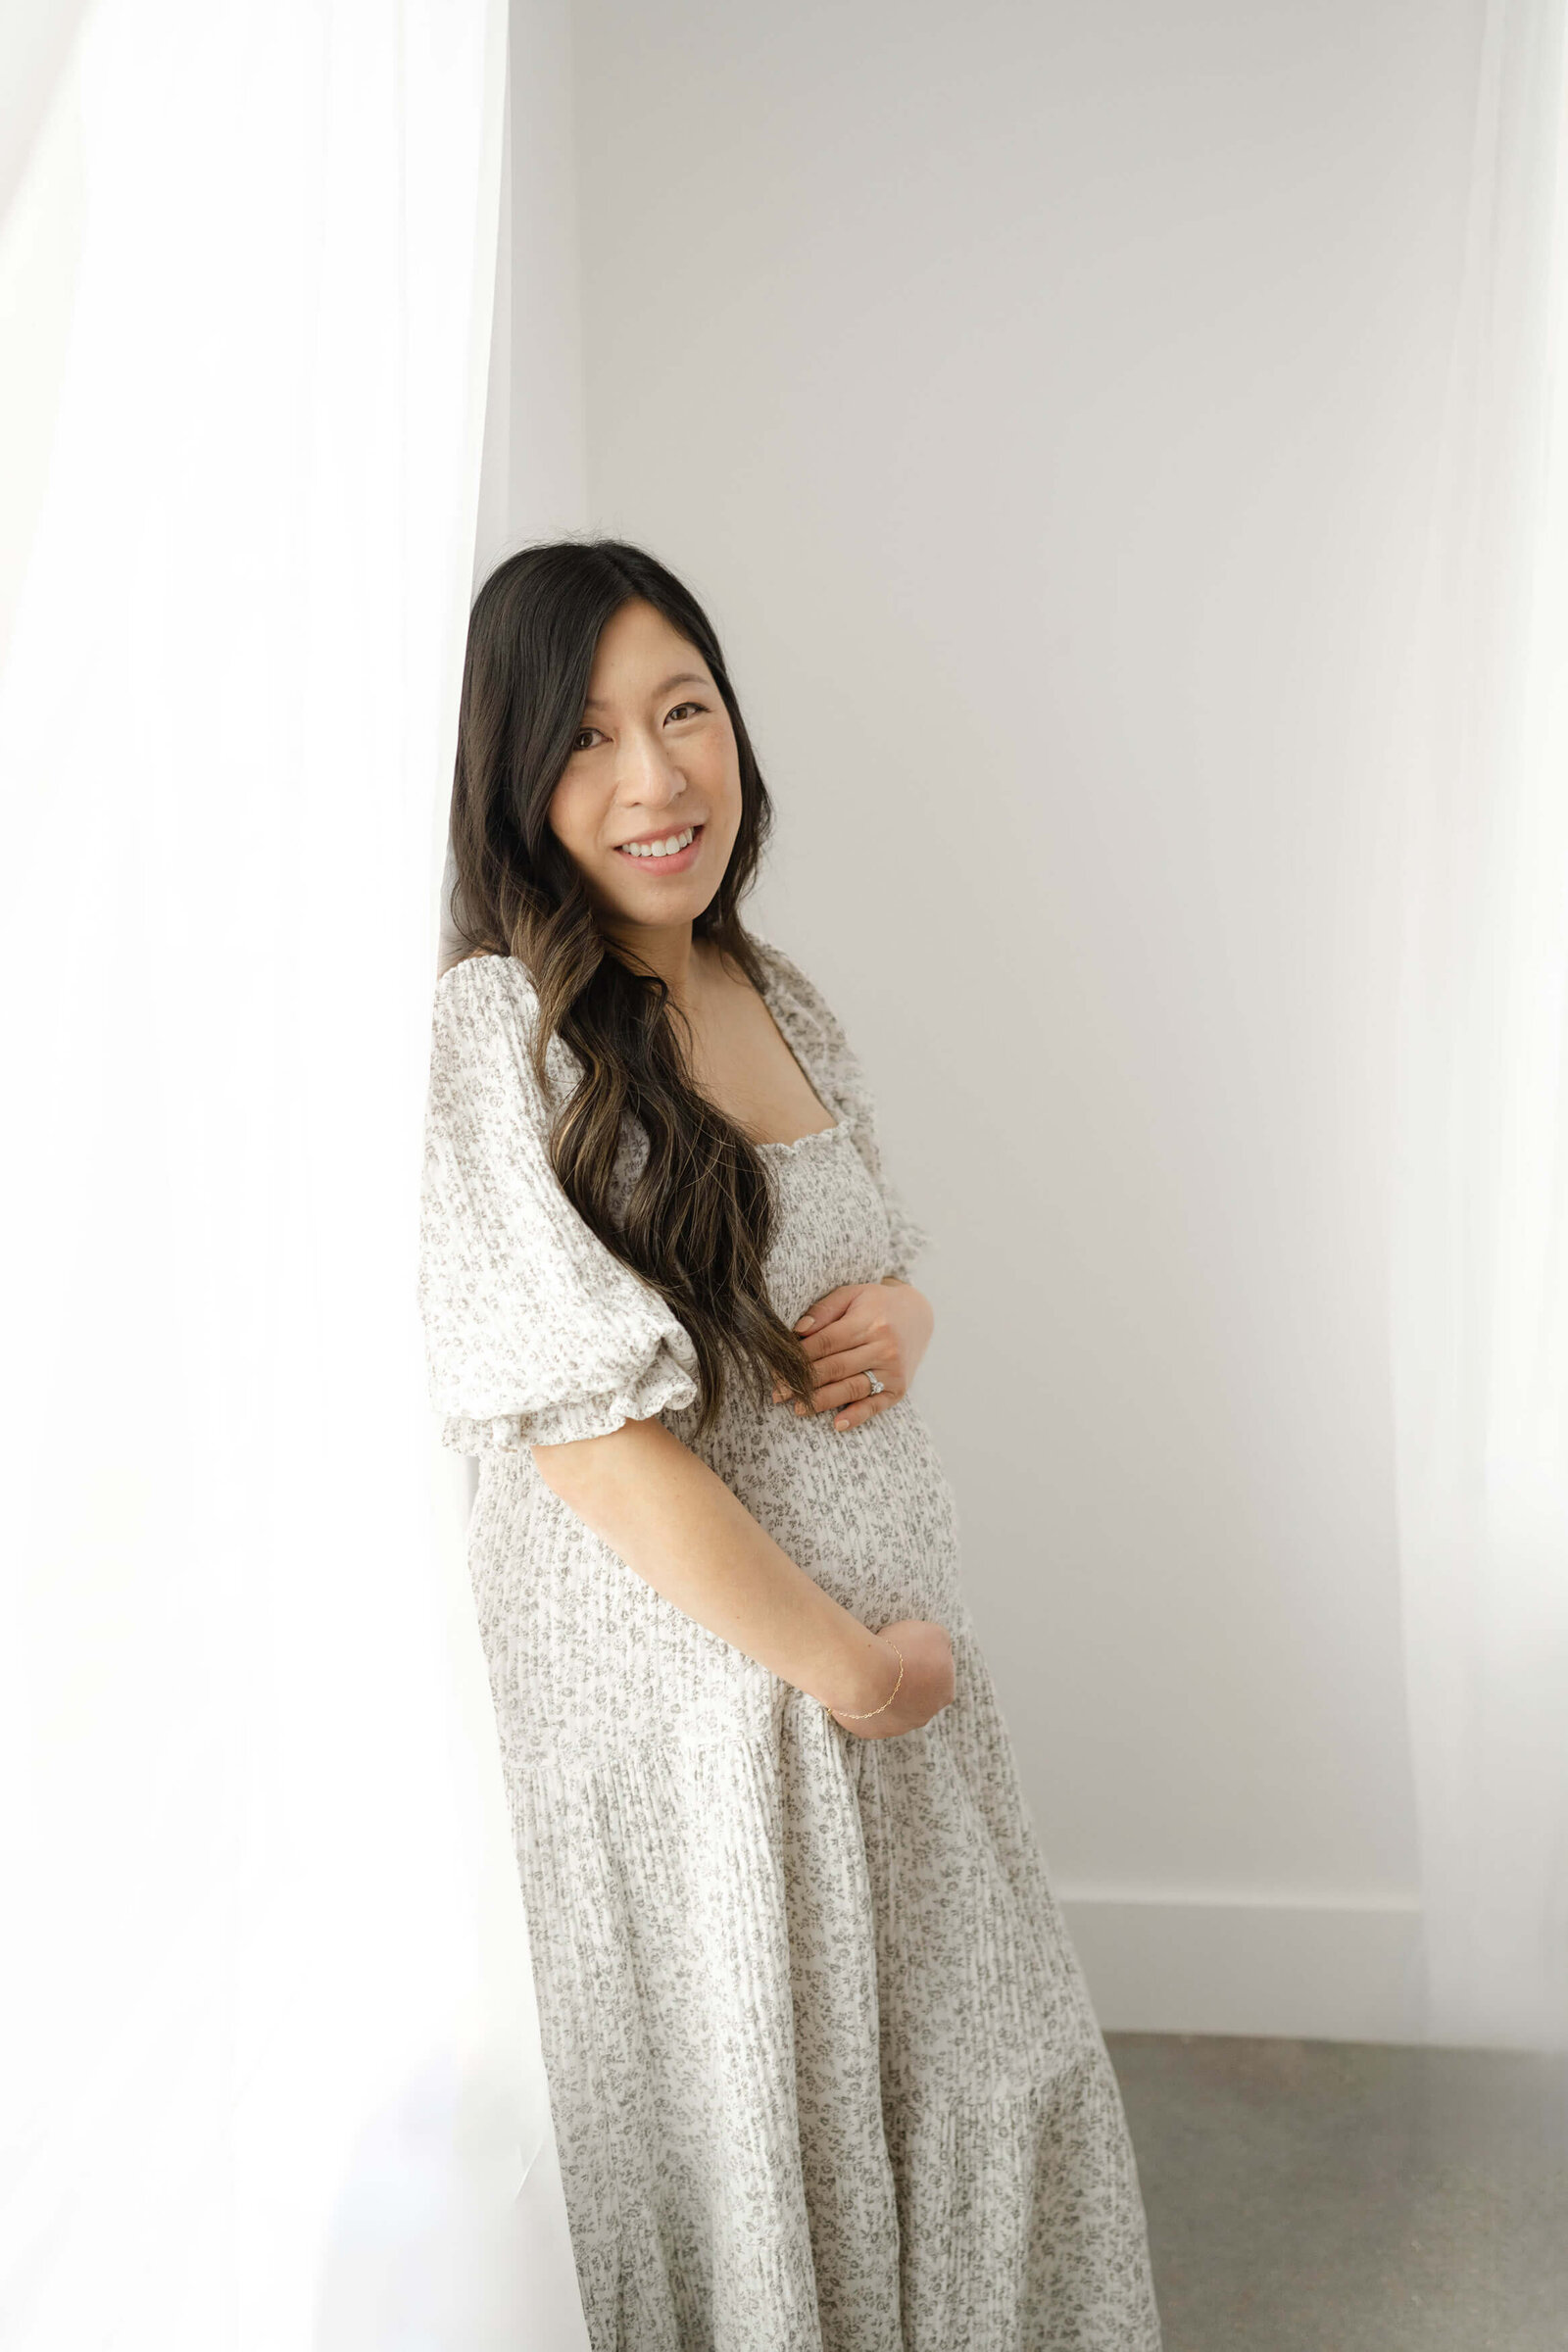 mom to be leaning on a wall as she smiles holding her baby bump